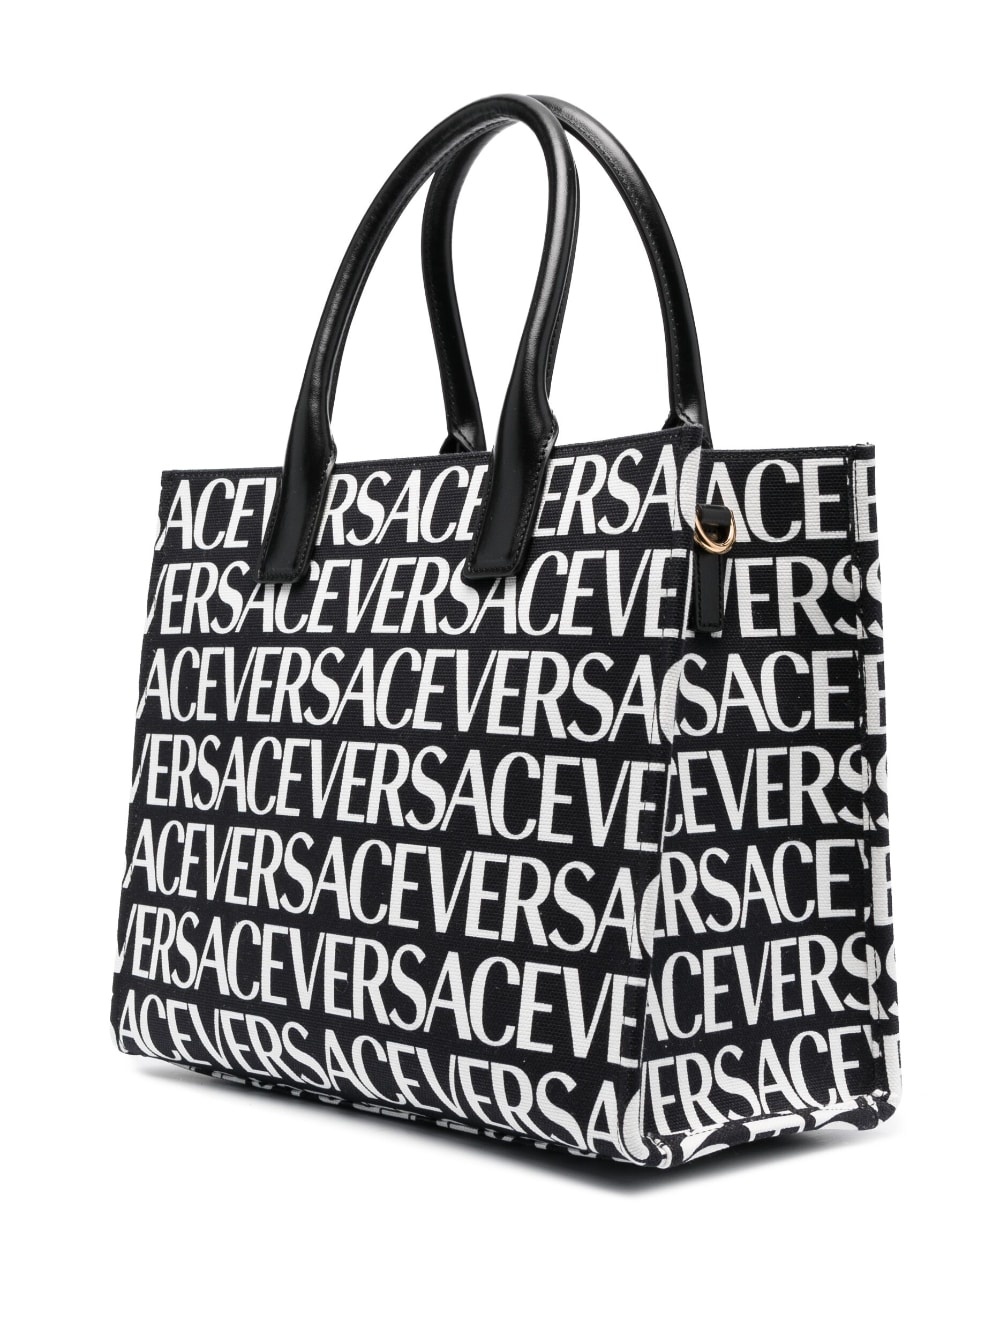 Versace Black tote bag with all-over logo